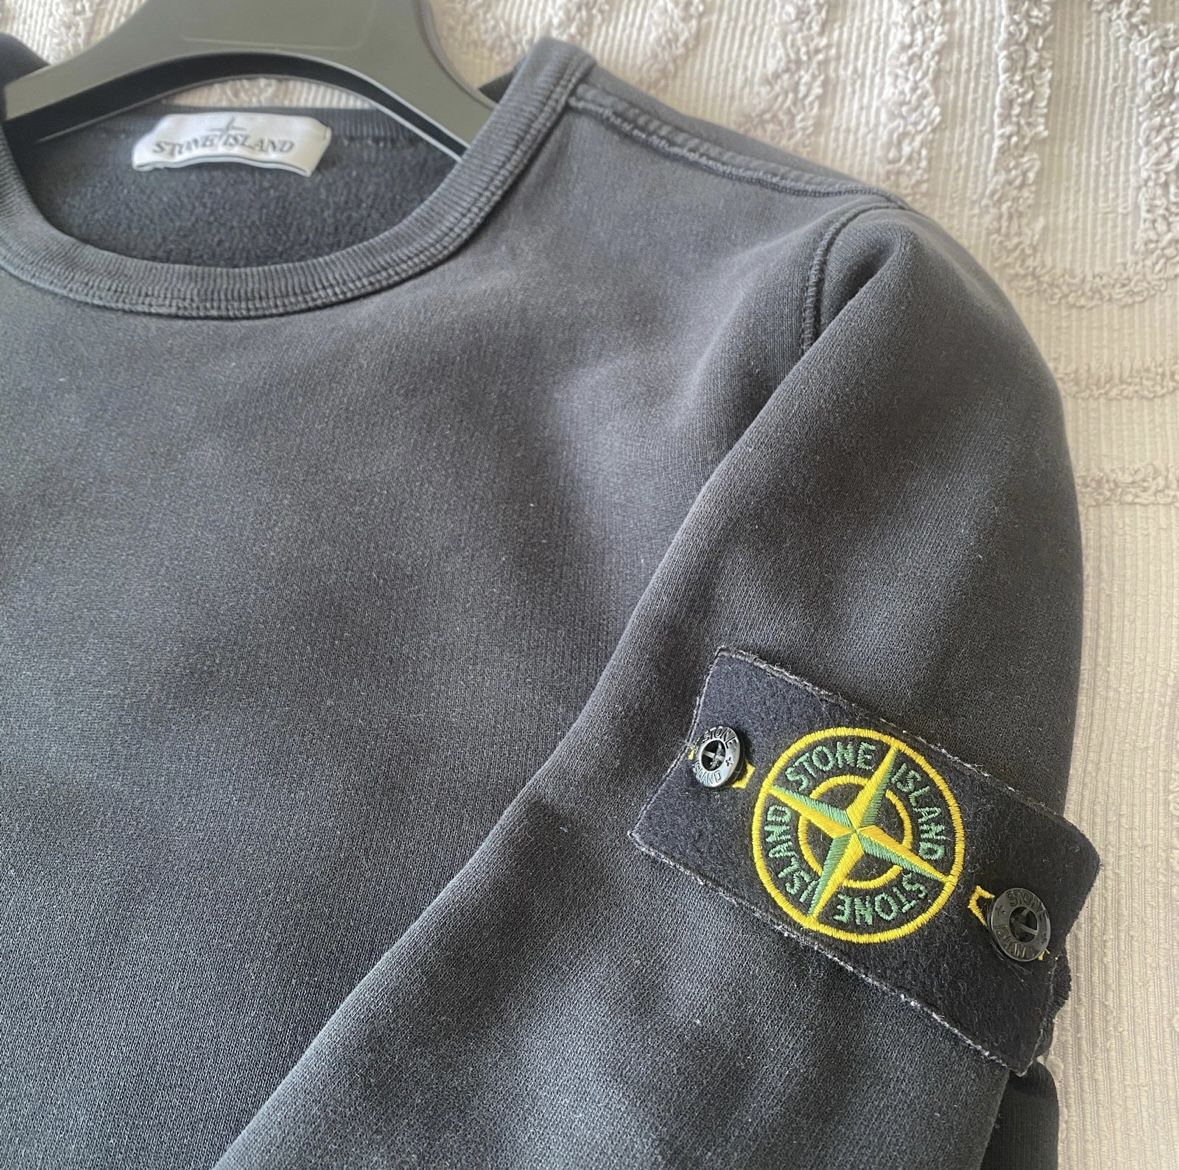 100% Authentic Stone Island Sweatshirt Washed Look Vintage Men’s Size S Small